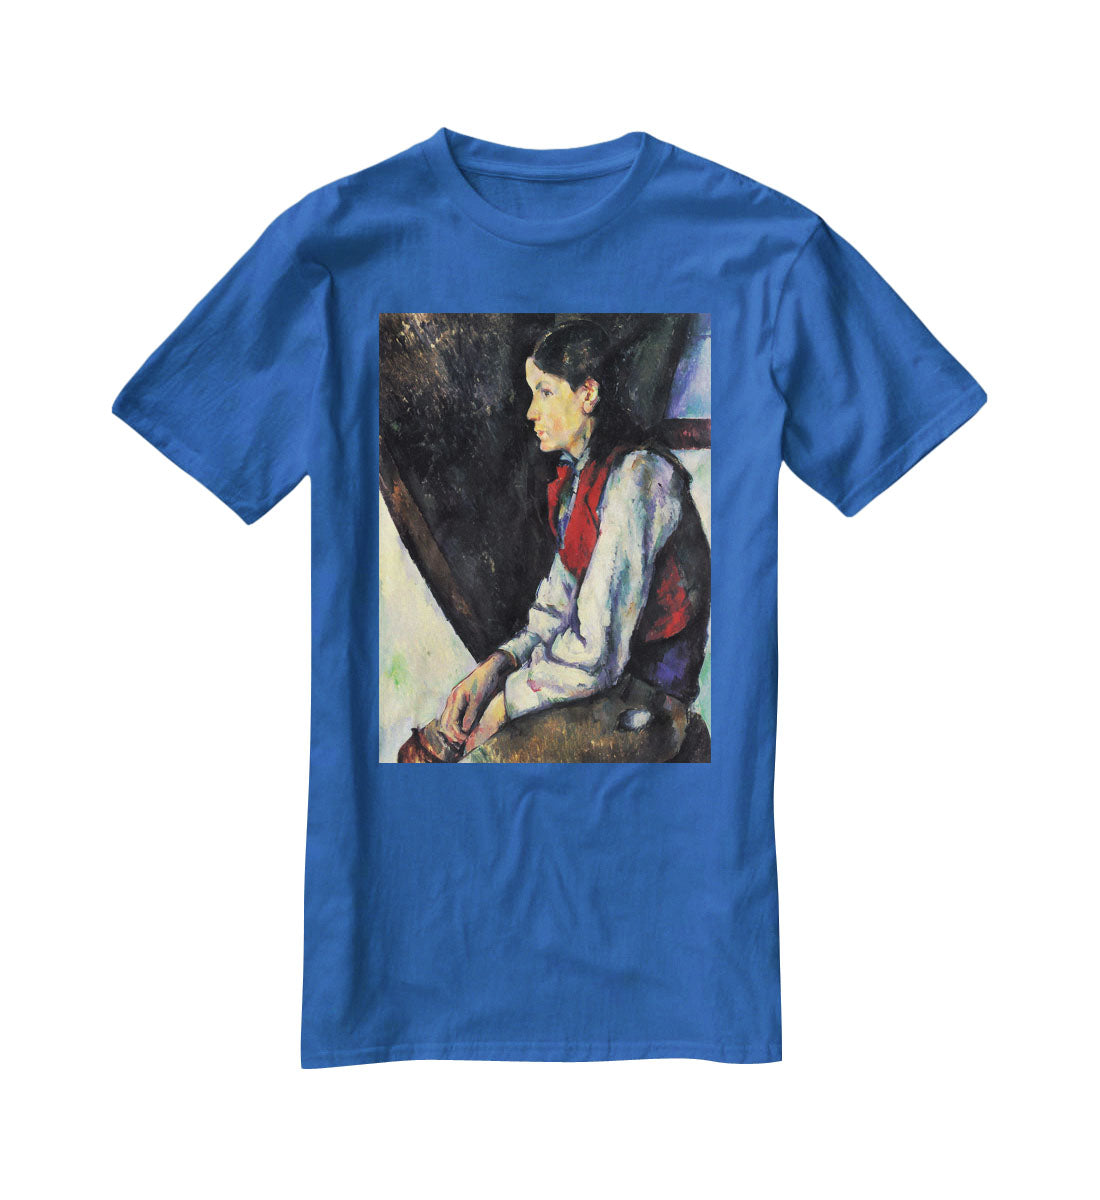 Boy with Red Vest by Cezanne T-Shirt - Canvas Art Rocks - 2